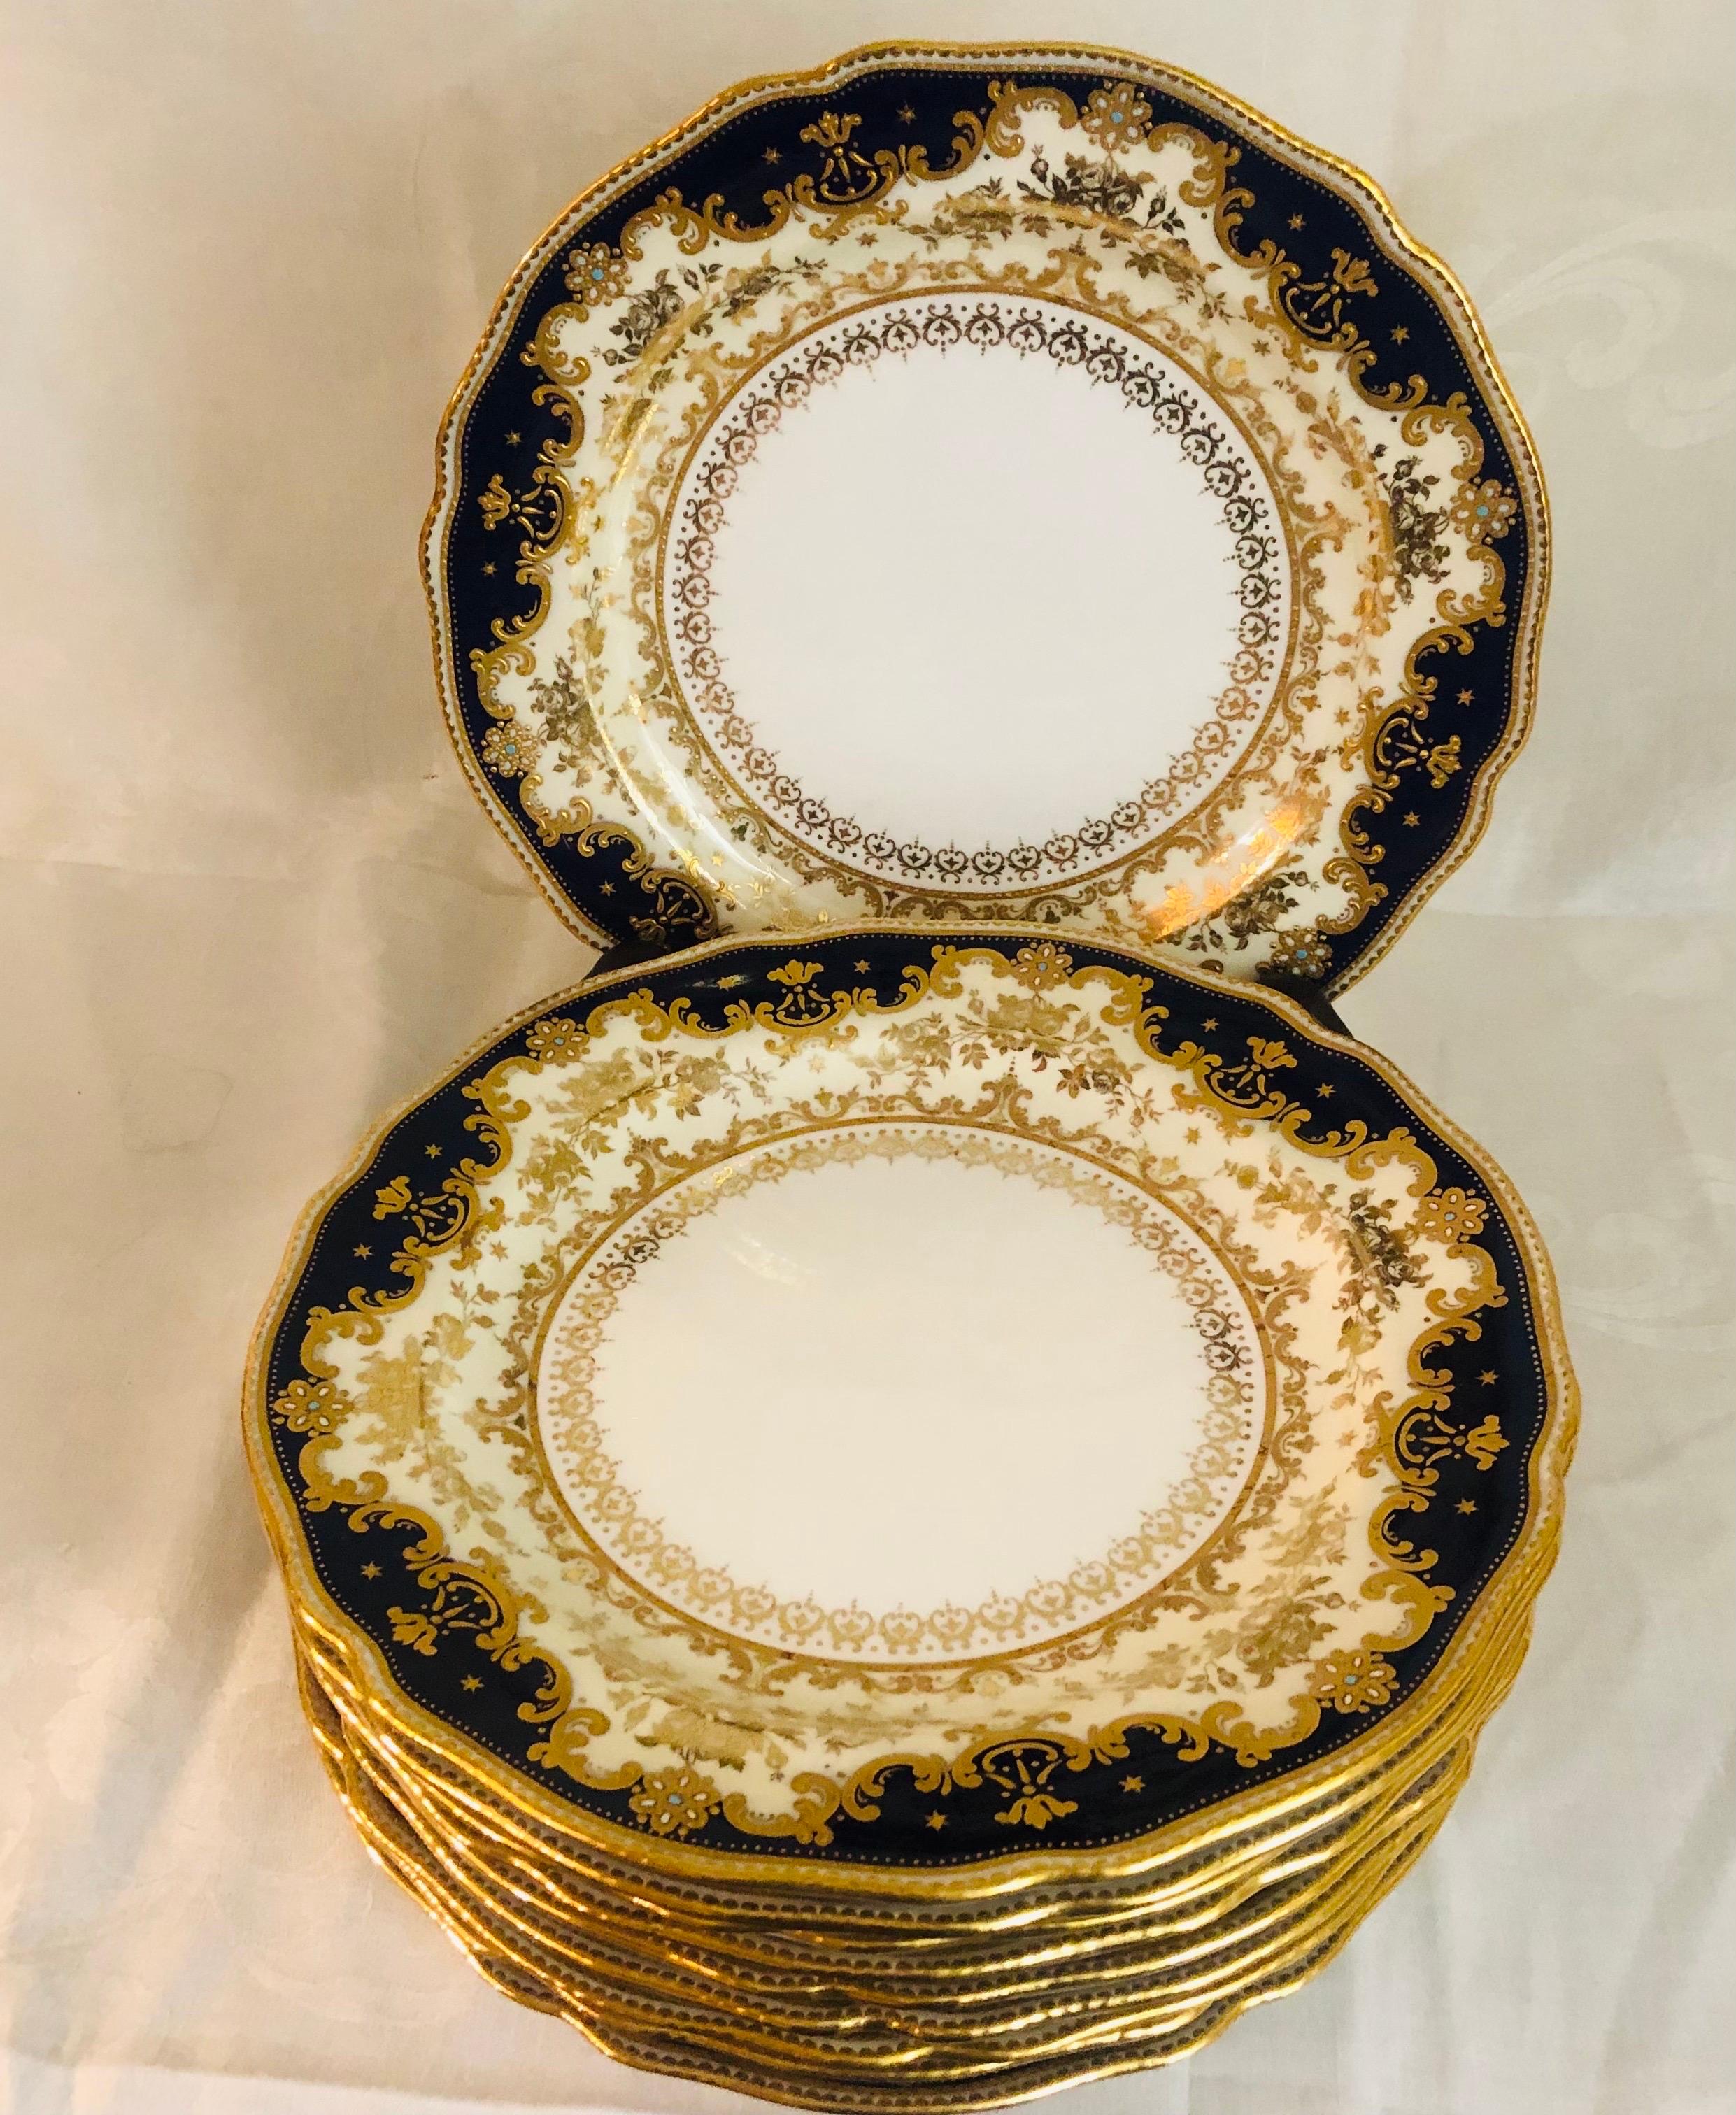 This is an absolutely stunning set of ten cobalt dinner plates made of Copeland's jeweled porcelain. Each plate has a cobalt fluted border with raised gold arabesque decoration. Inside this outer border, is a cream border with a gold flowered